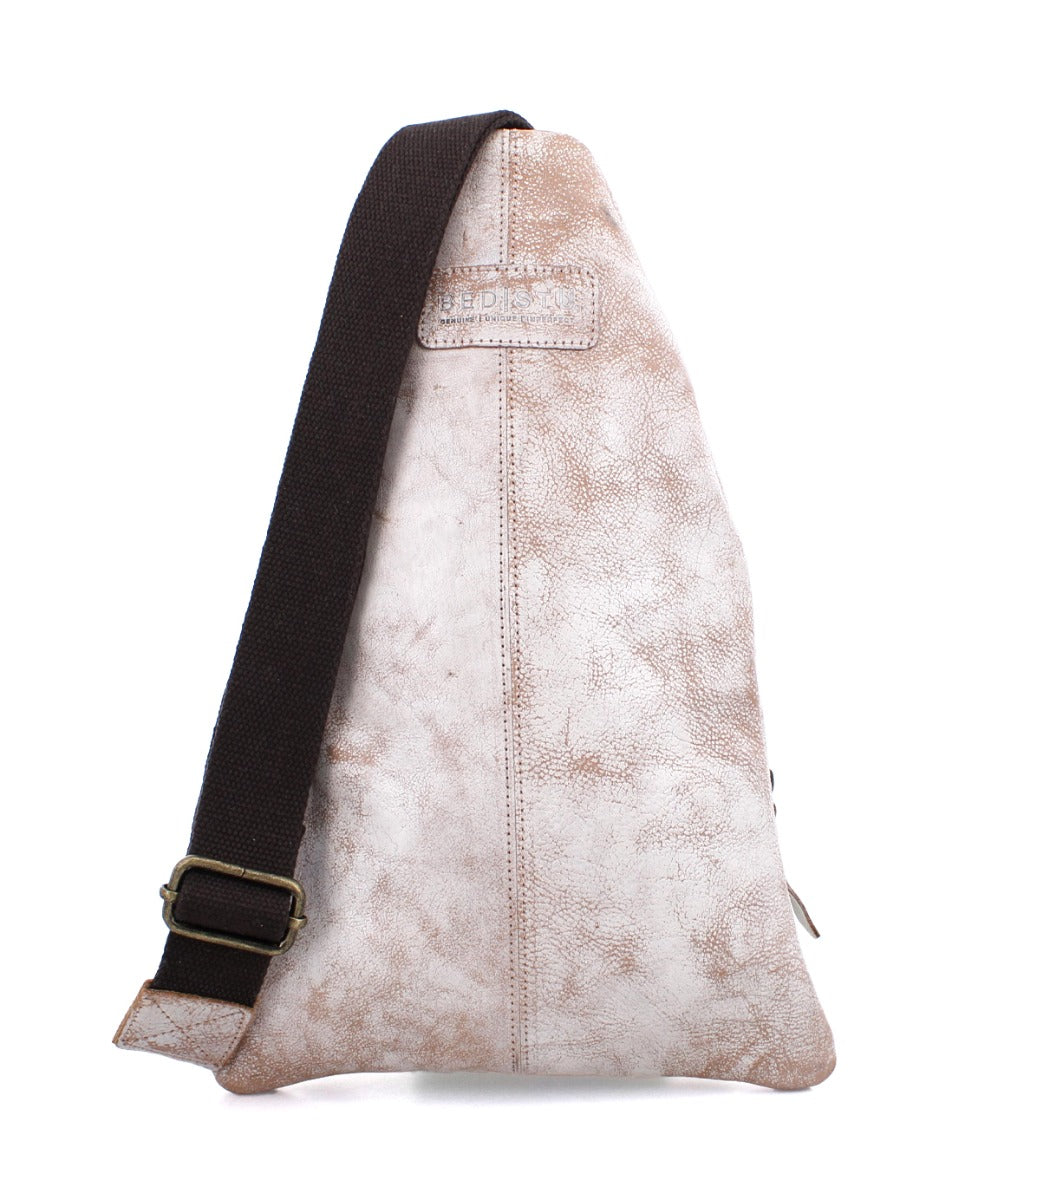 A white Andie sling bag with brown straps from Bed Stu.